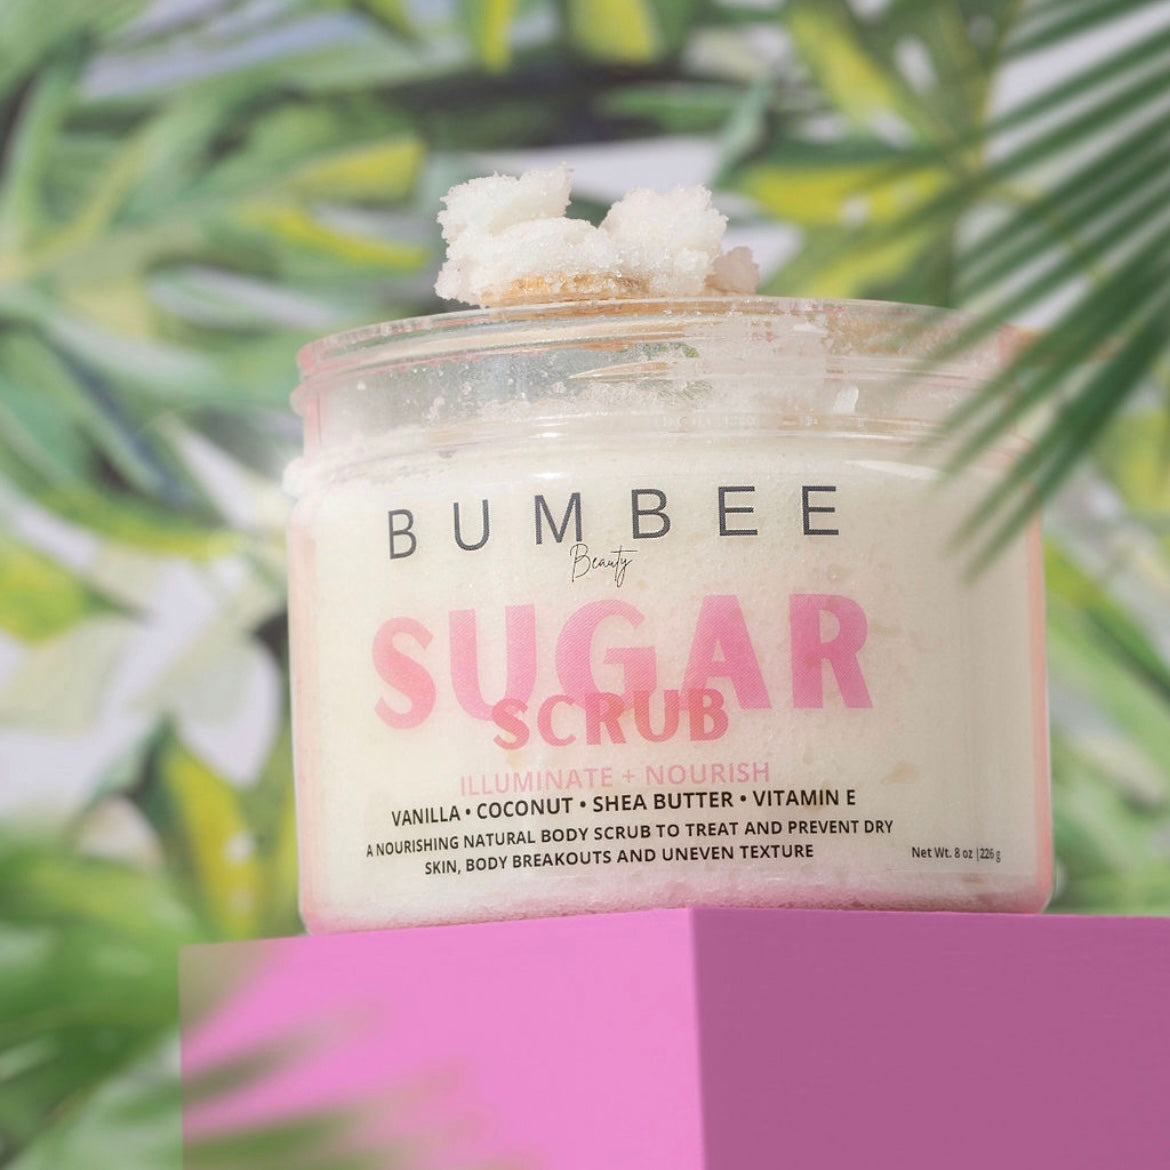 A jar of Bumbee Beauty Sugar Scrub placed in a tropical setting, with the scrub's textured surface visible on top of the Sugar scrub 8 oz Jar. The image evokes a sense of relaxation and indulgence, highlighting the product's natural ingredients and luxurious feel